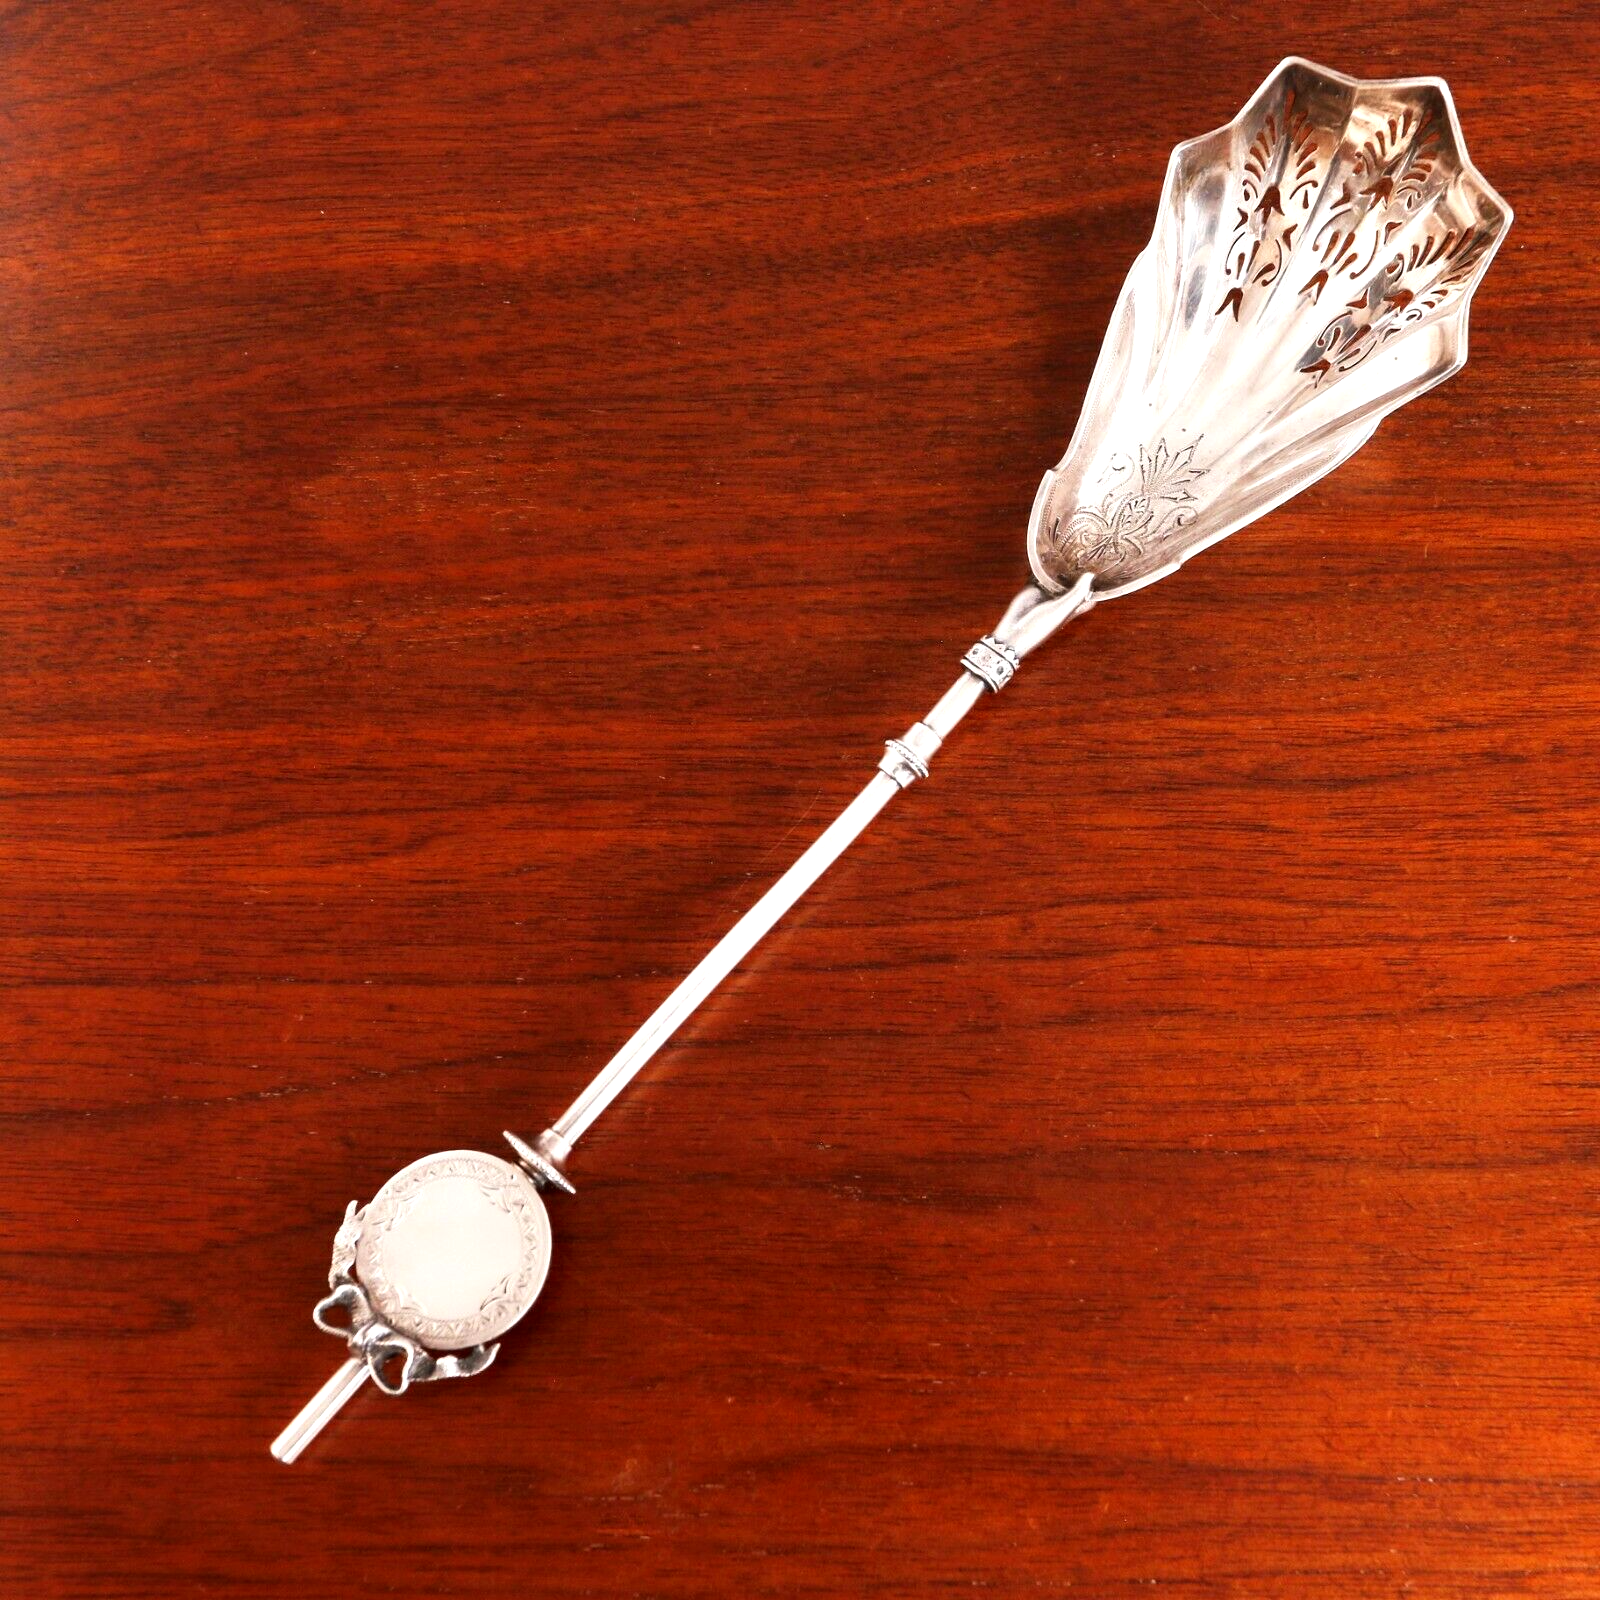 Antique Valuations: GORHAM AMERICAN AESTHETIC STERLING SILVER PEA SERVER LADY'S 1865-68 NO MONOGRAM